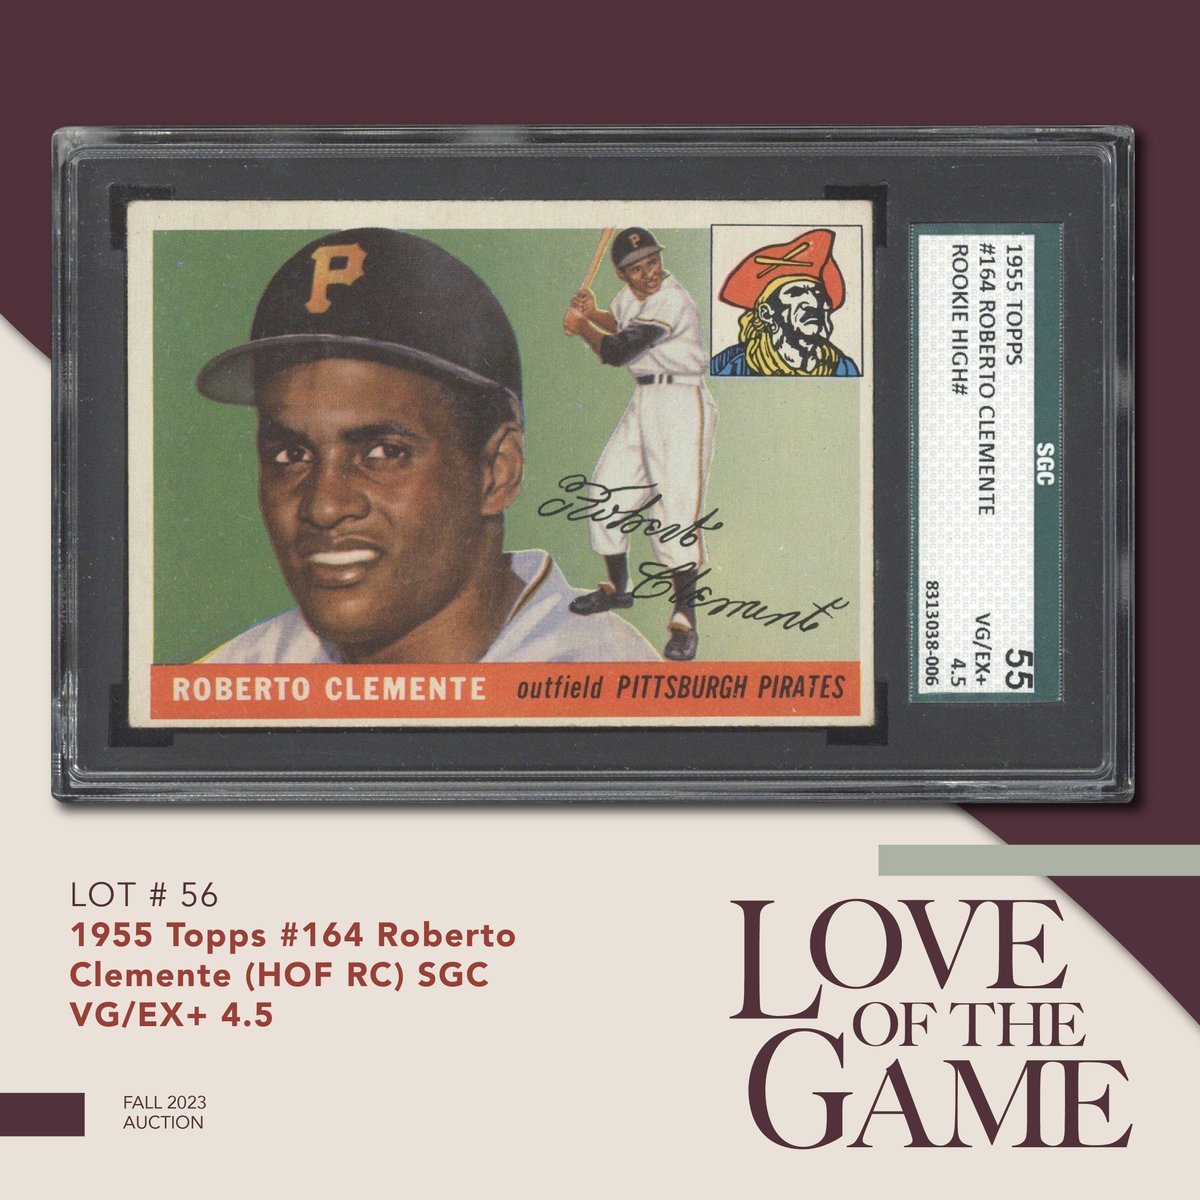 High-grade examples of Roberto Clemente's rookie card have soared into the stratosphere in recent years.  Here's a very attractive, much more affordable example. Bid at LOTGAuctions.com. #thehobby #retire21 @whodoyoucollect #LOTGAuctions #GOSGC